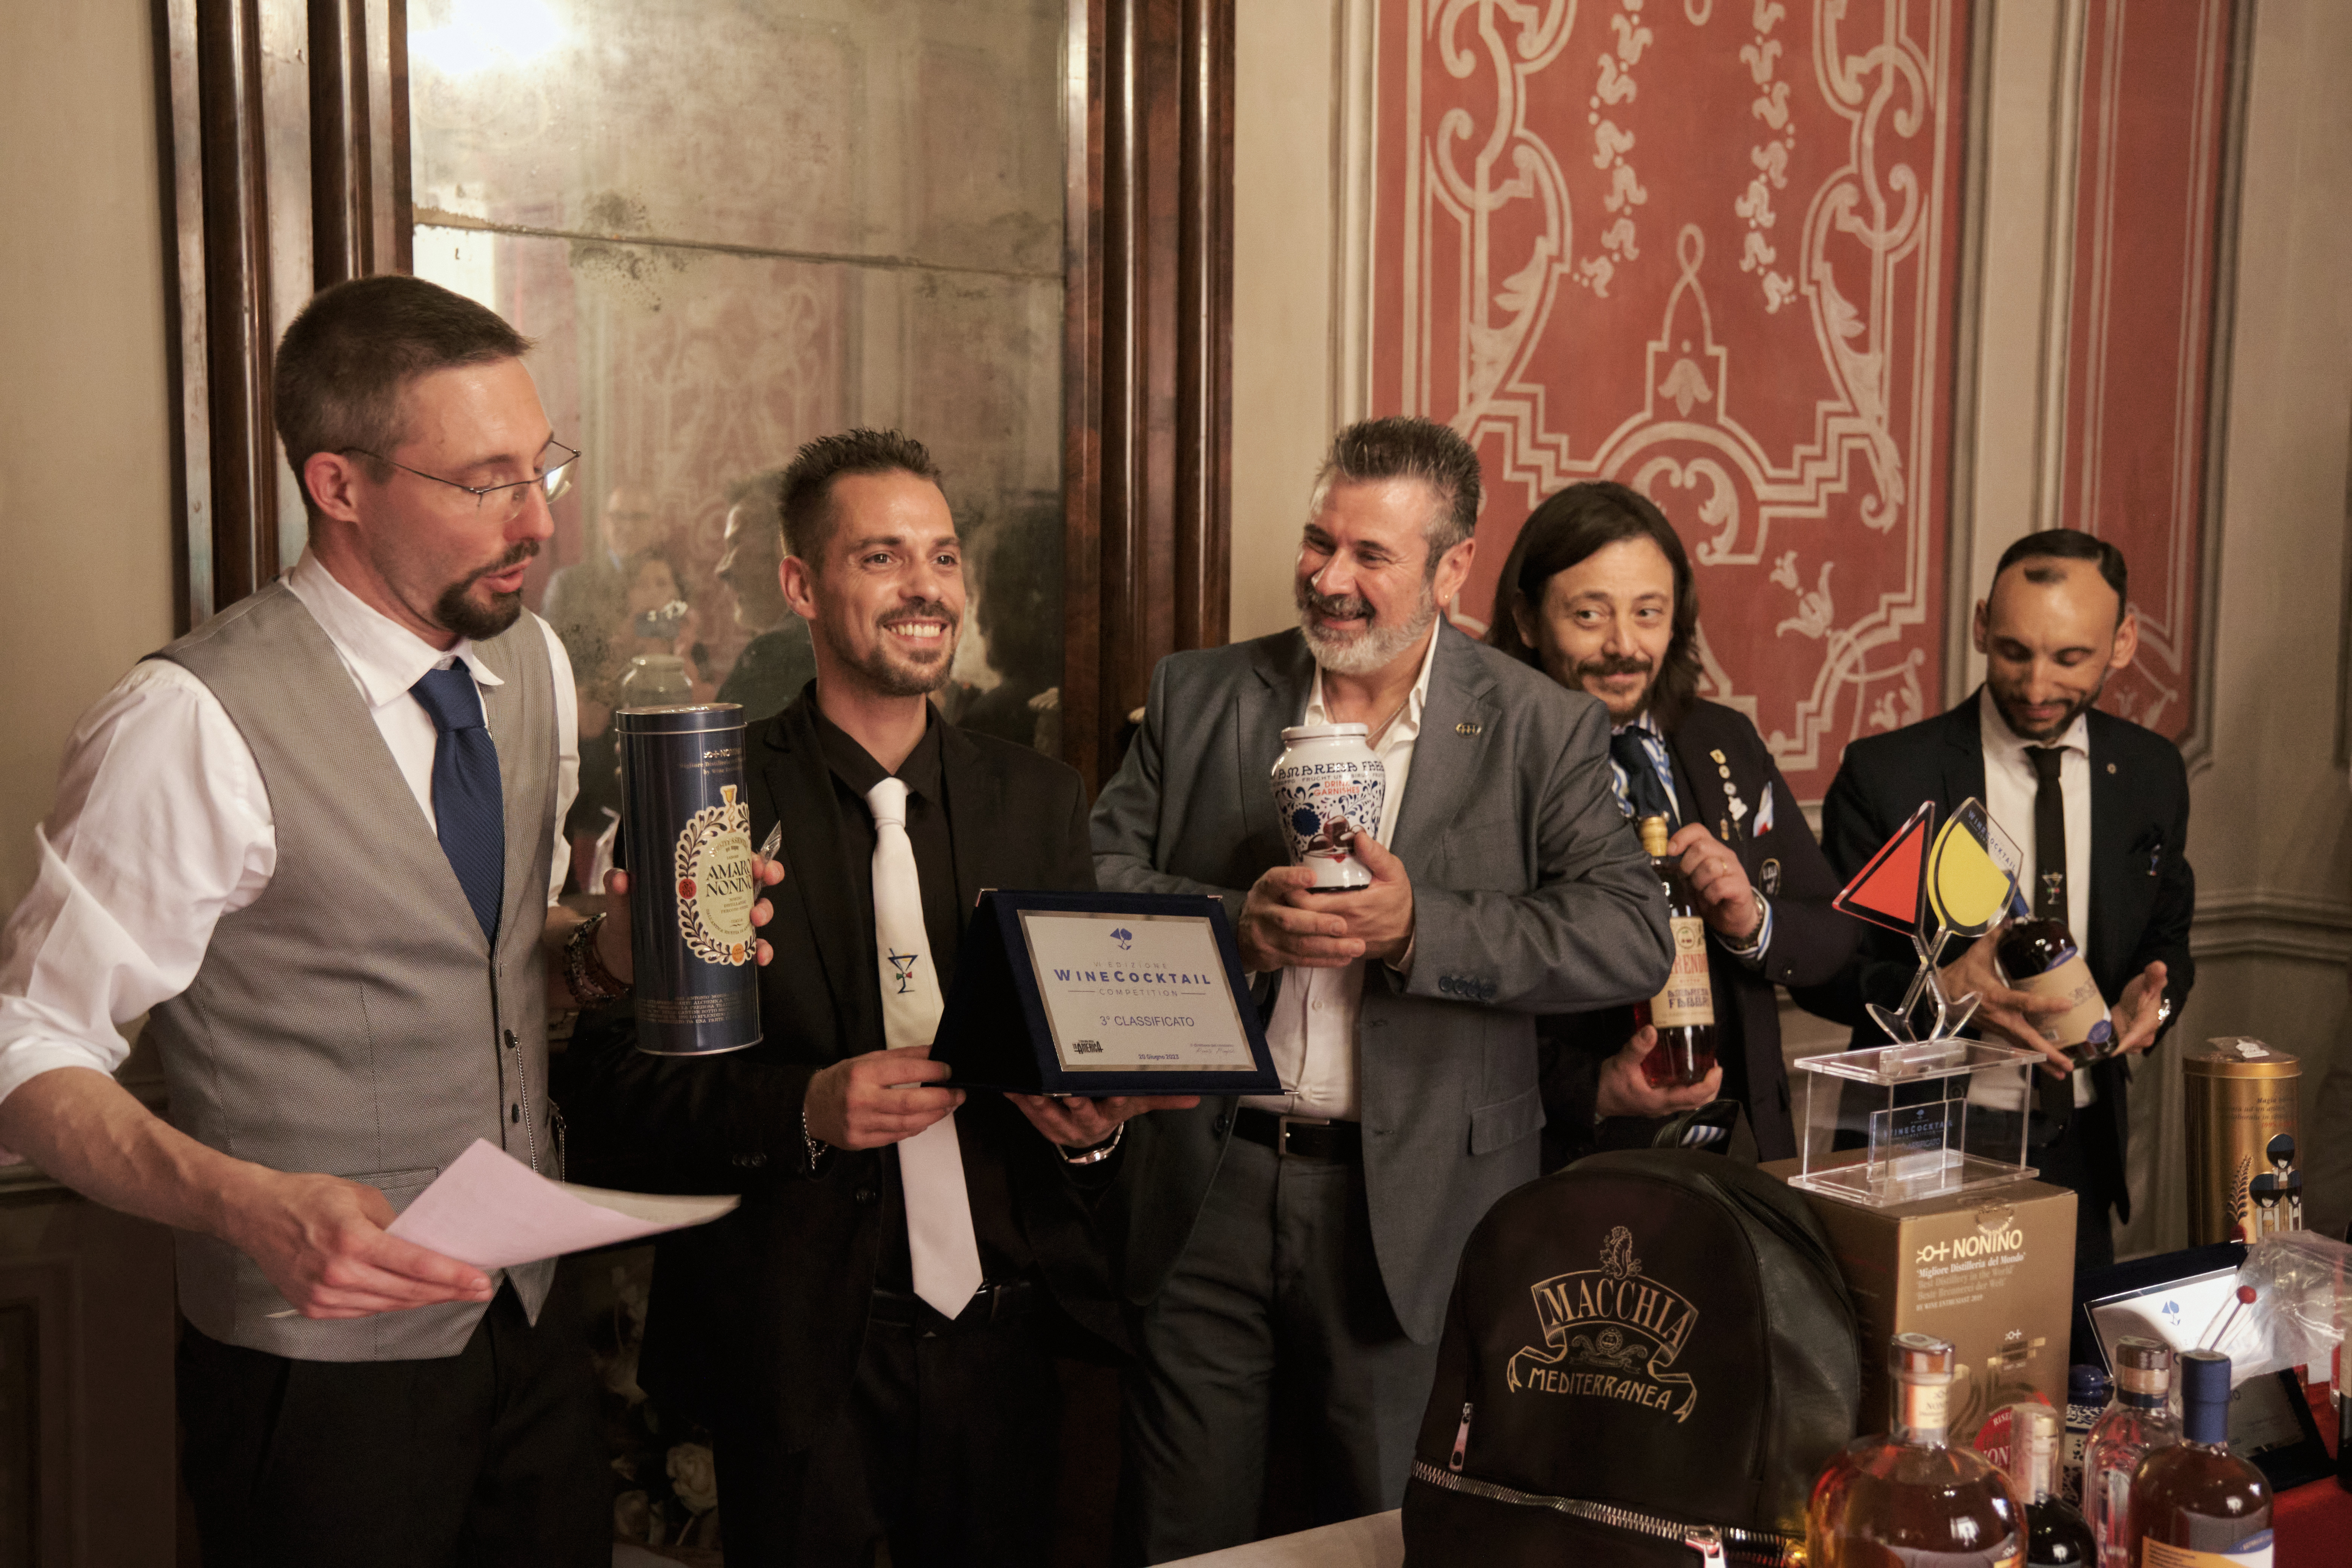 winecocktailcompetition